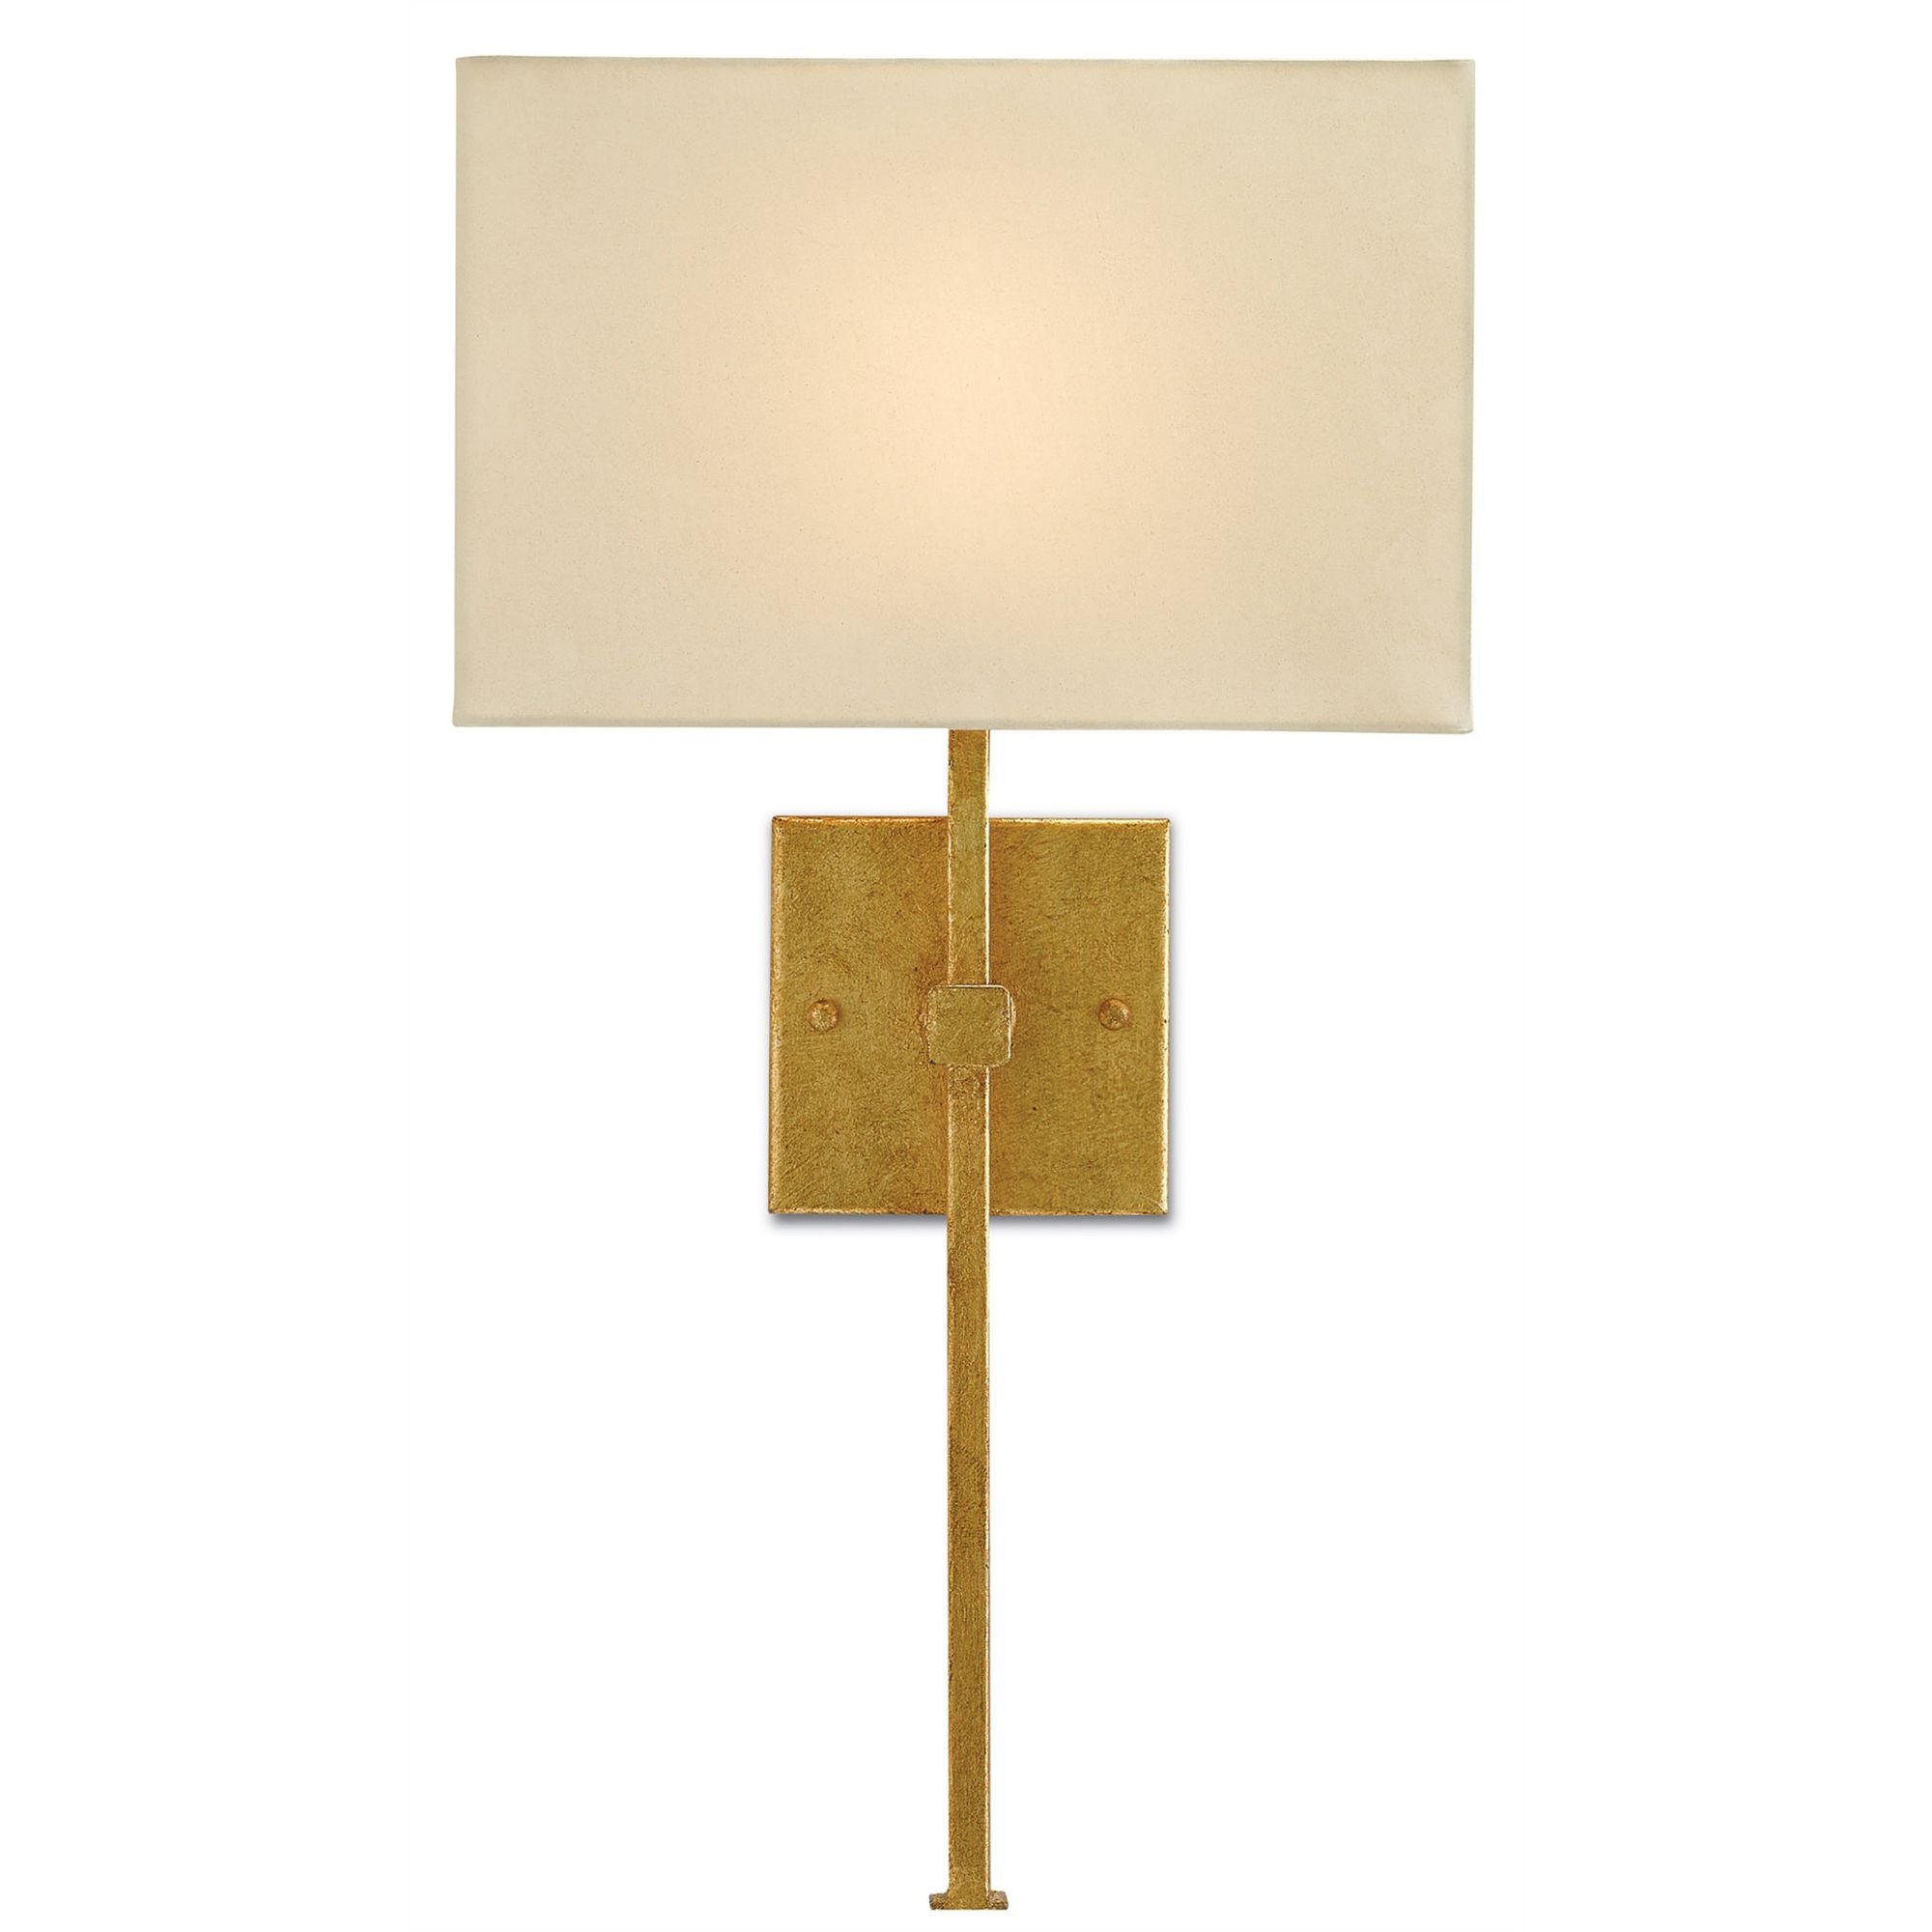 Ashdown Gold Wall Sconce, White Shade - Antique Gold Leaf